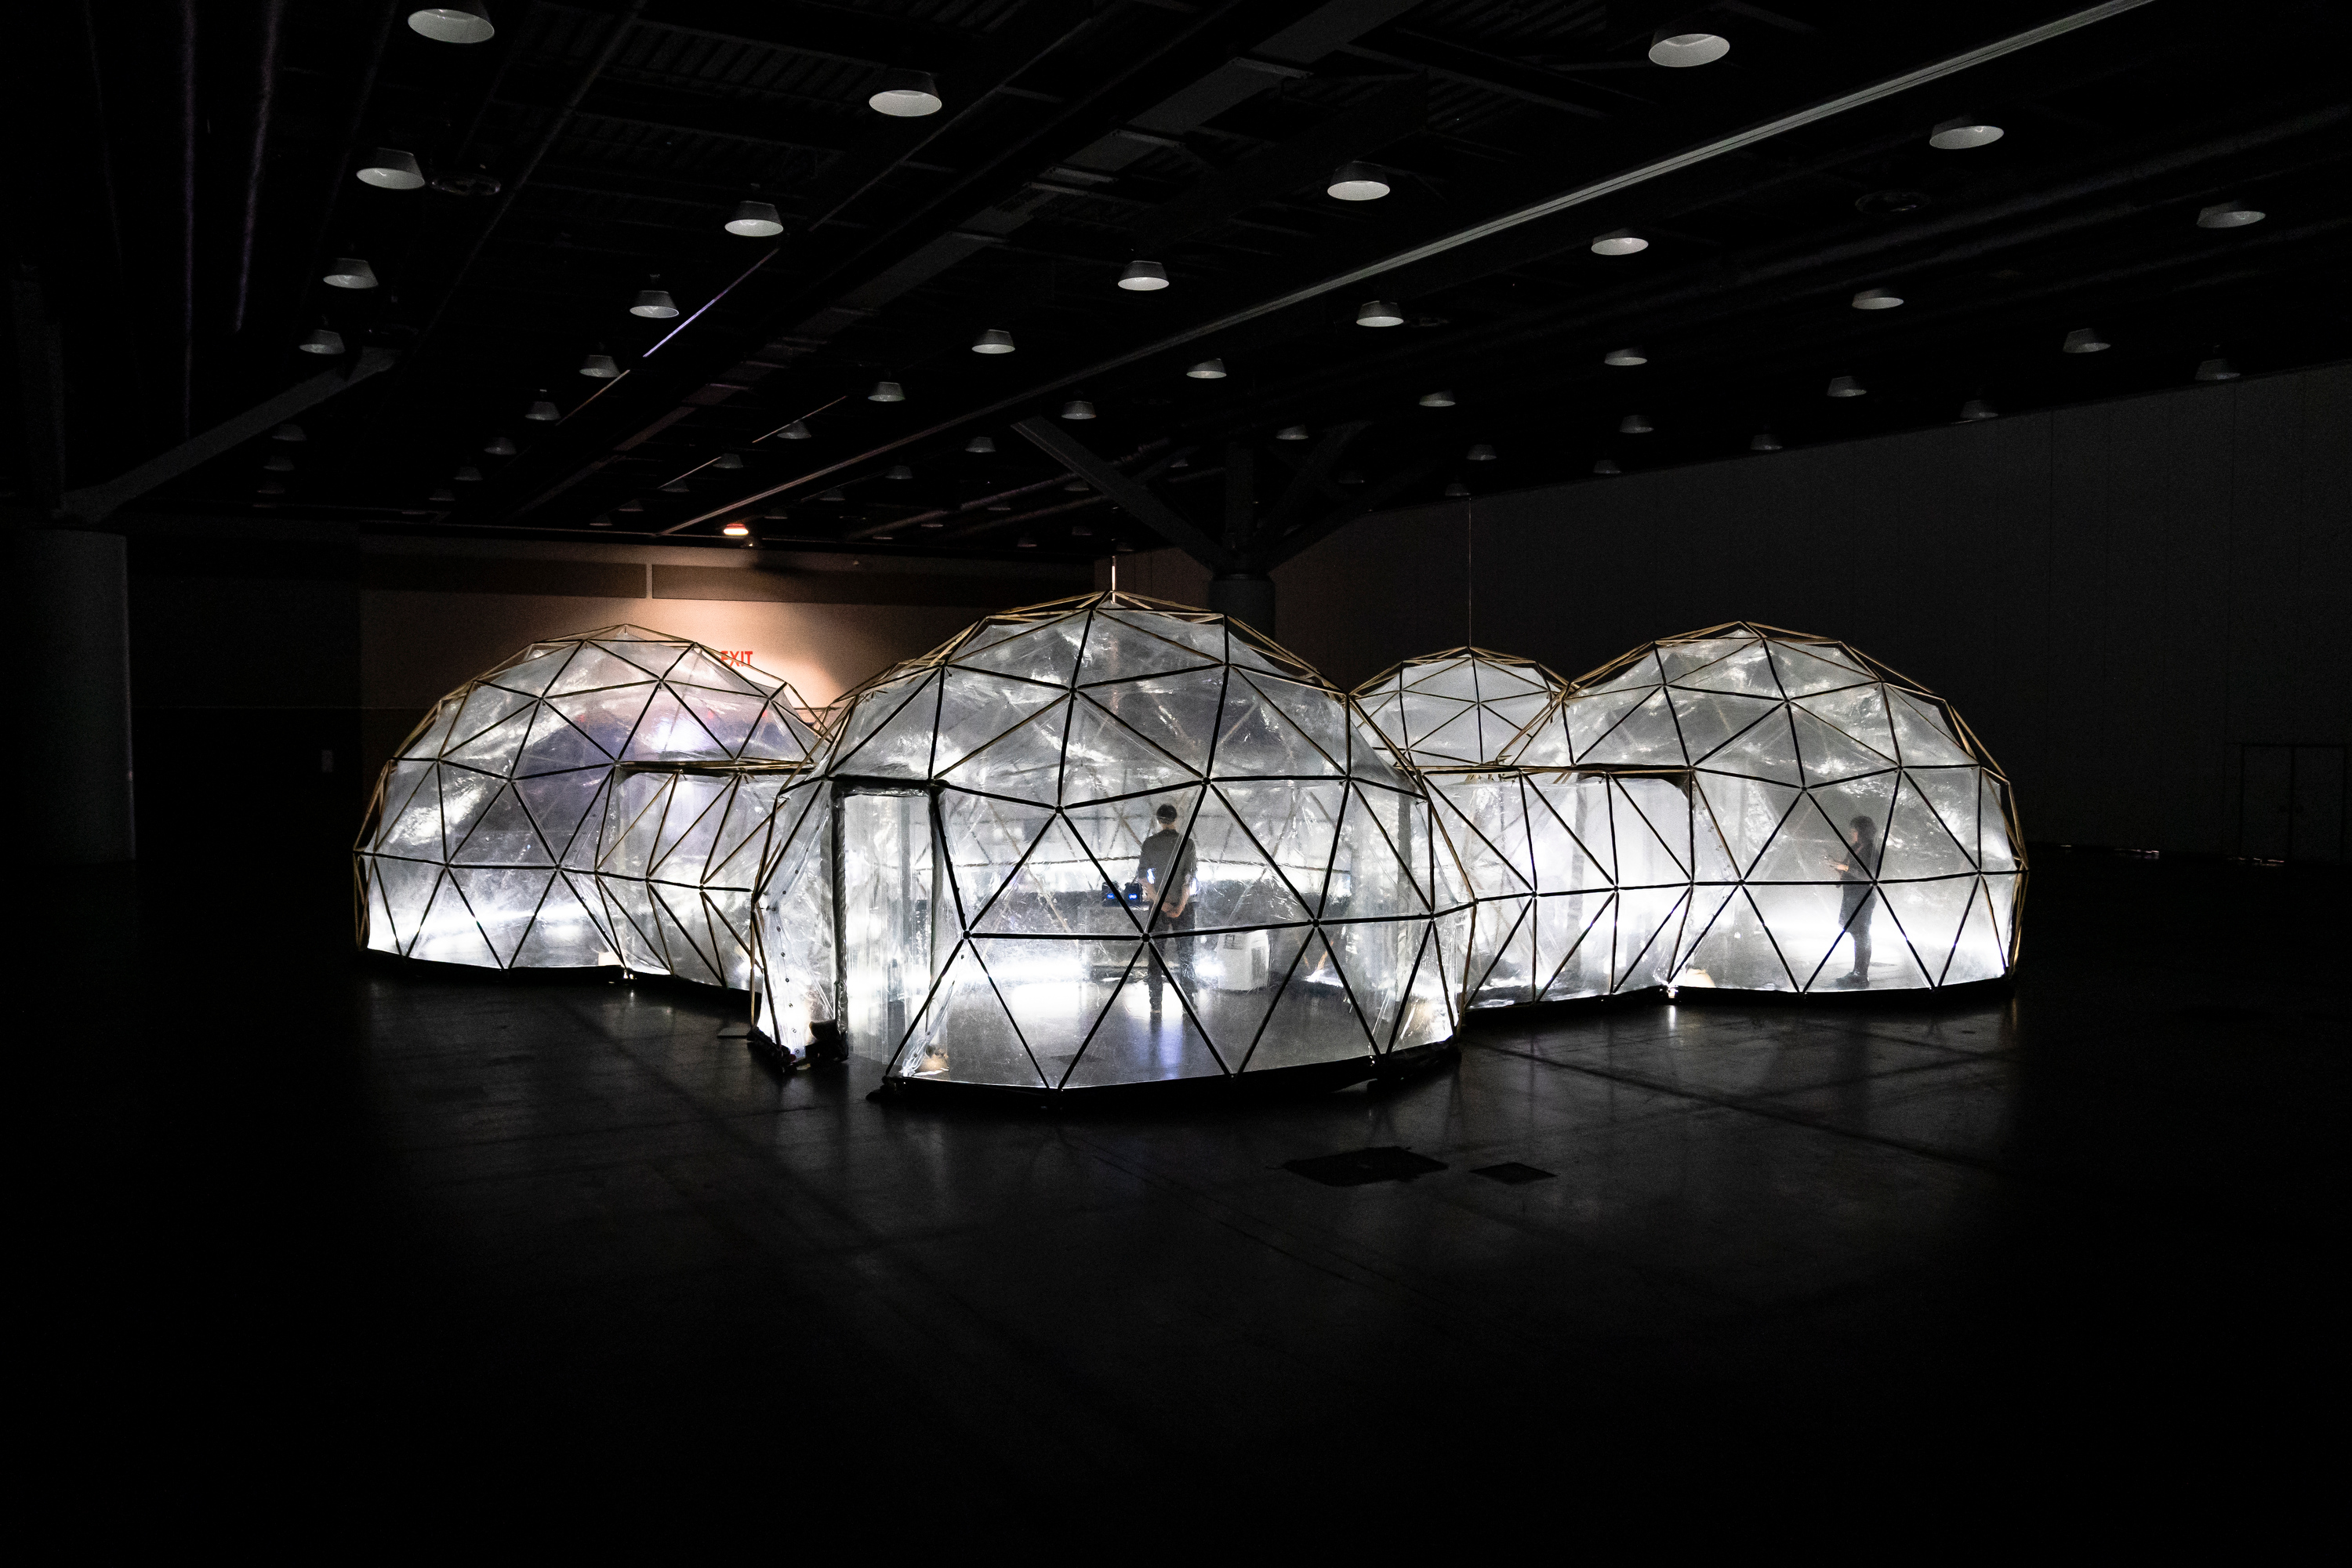 Pollution Pods: A tasting menu of our planet’s air quality, at
TED2019